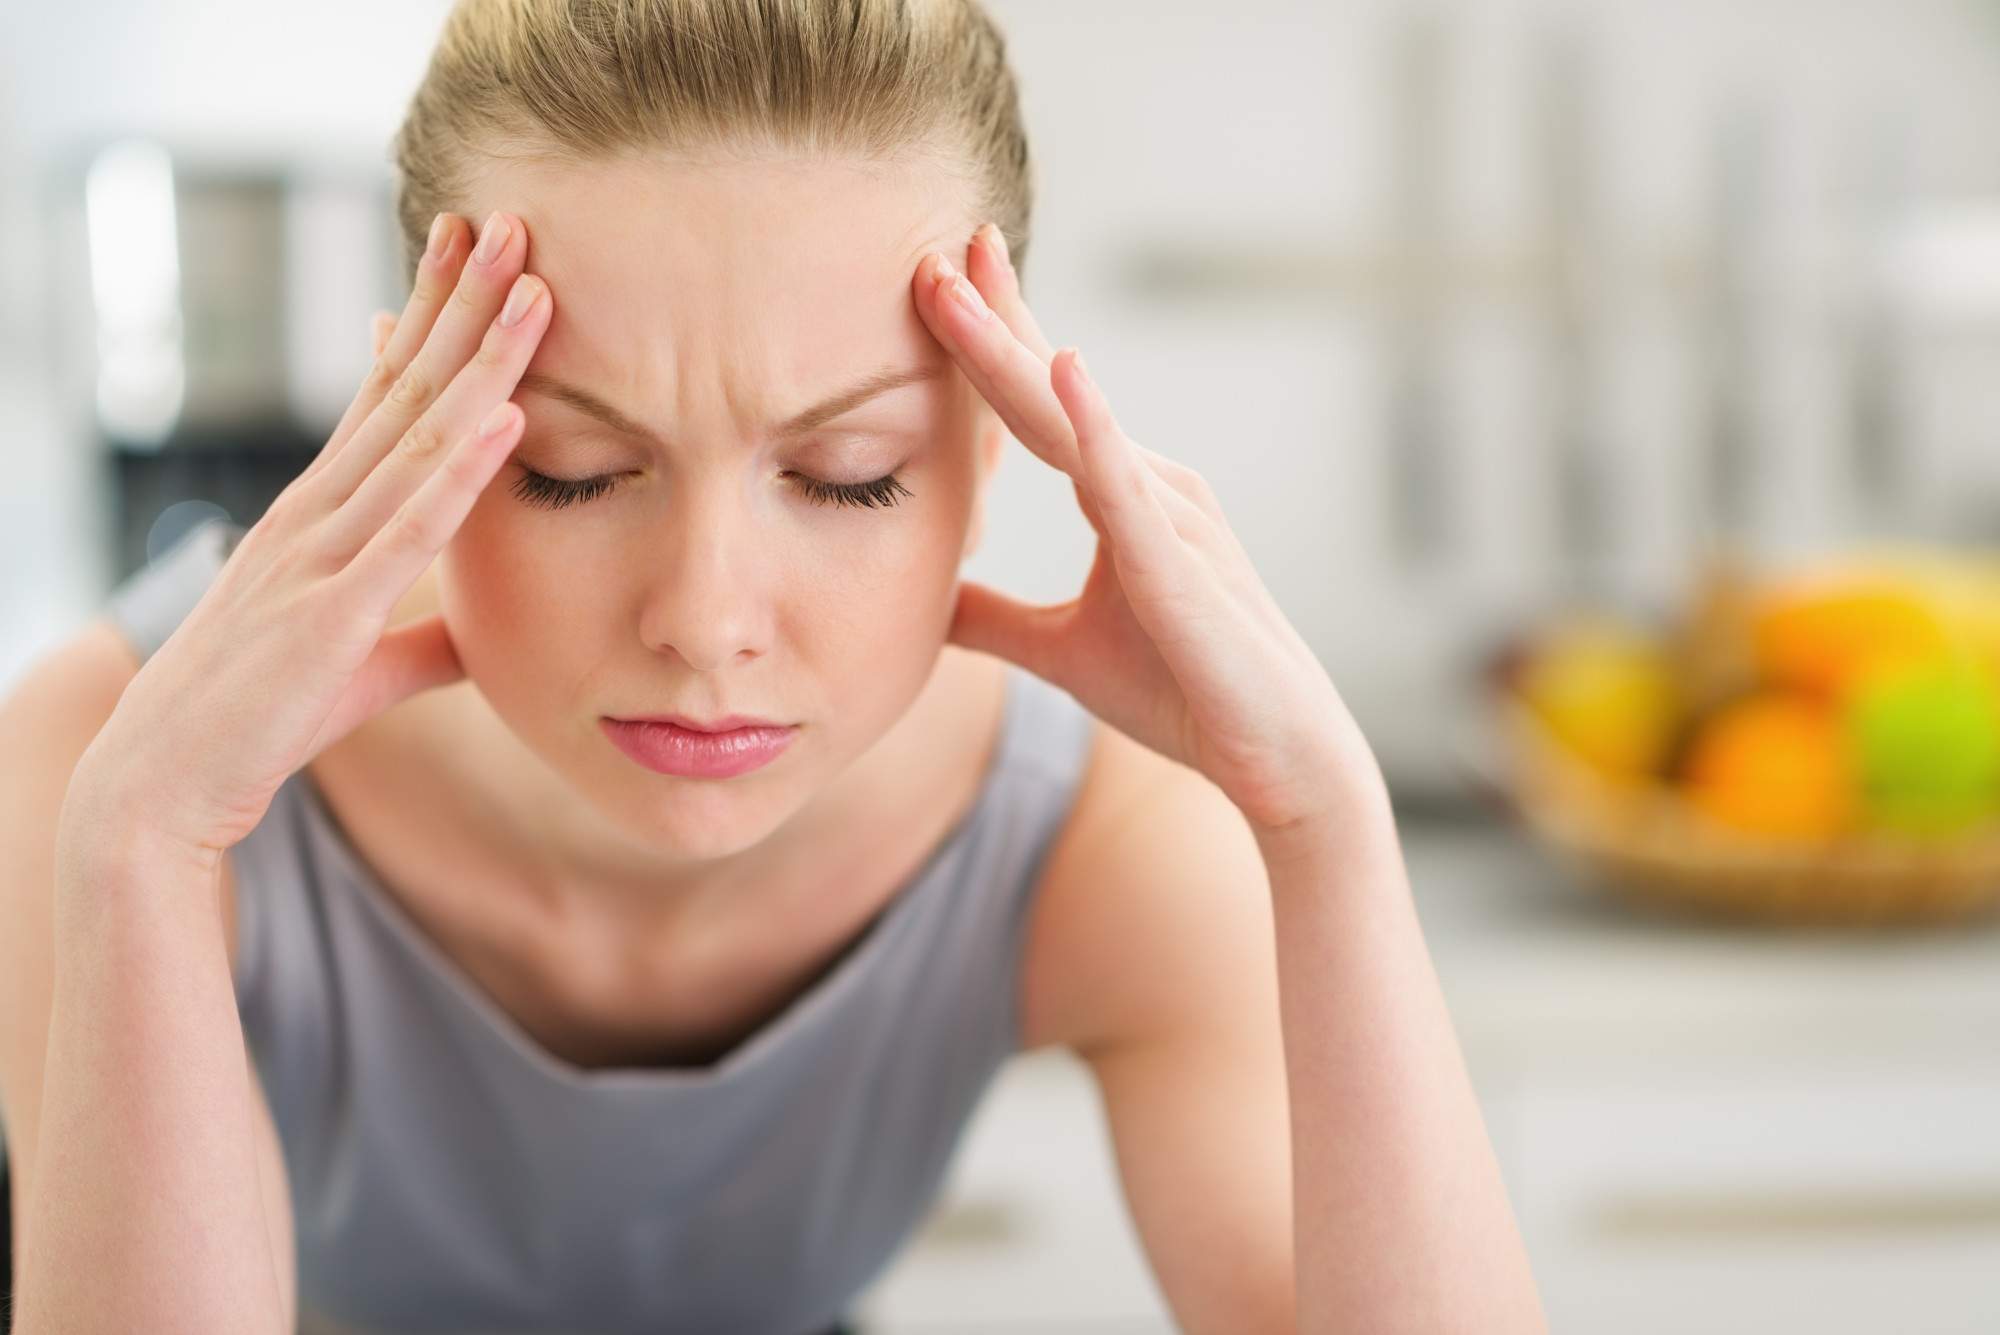 How to Tell if Your Back of Head Pain Is a Headache or Migraine